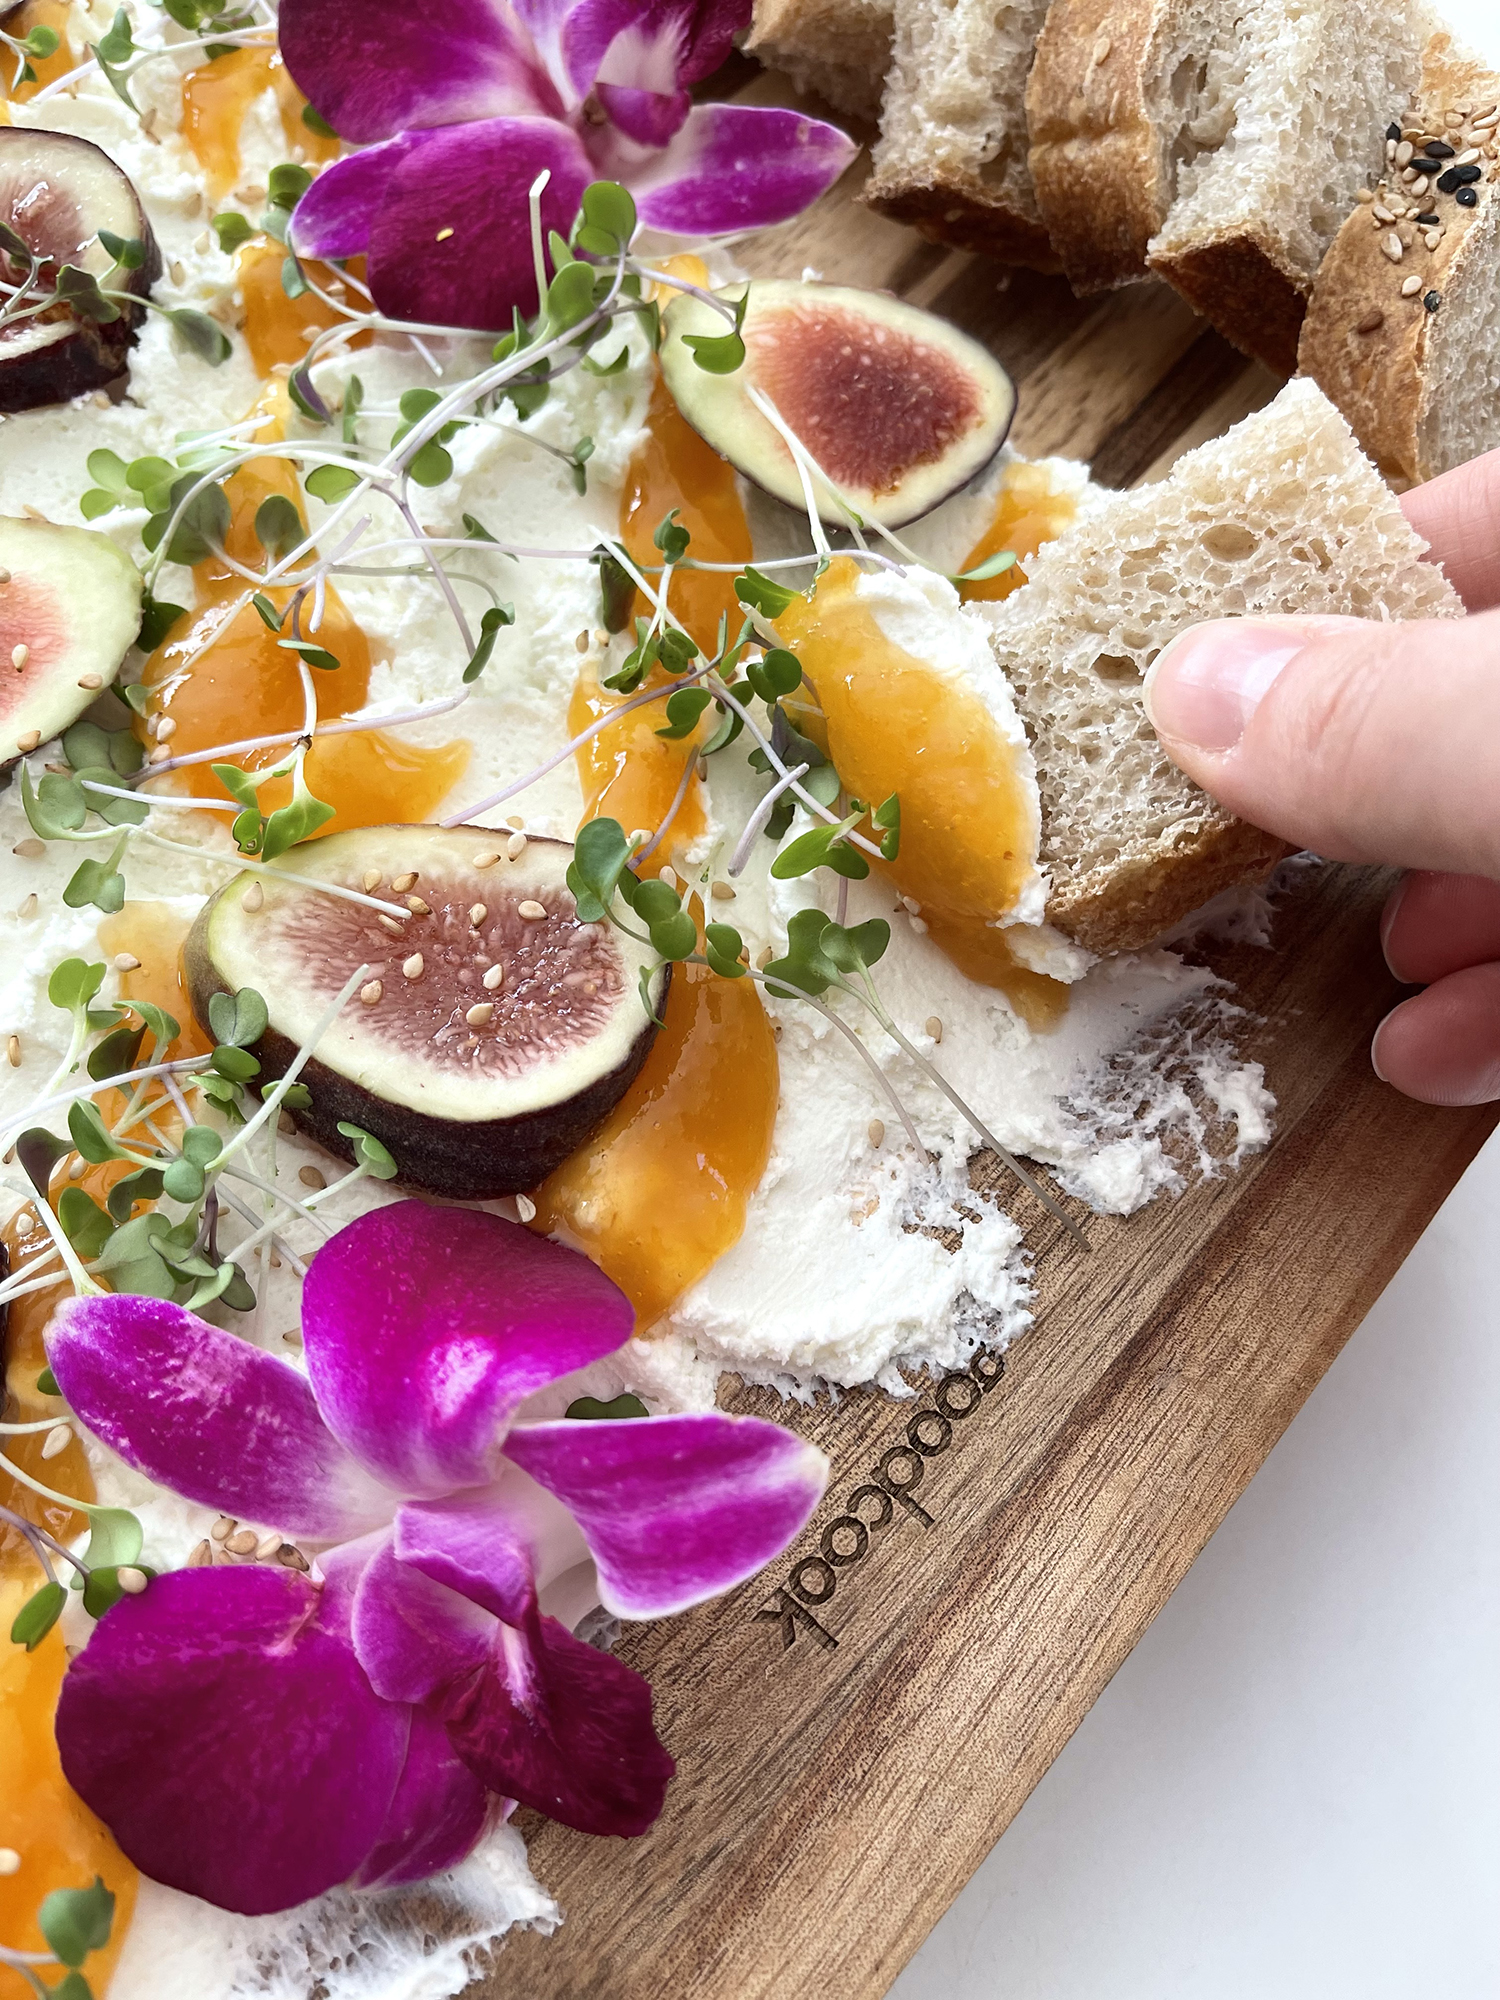 Goat Cheese Board with Figs and Apricot Jam